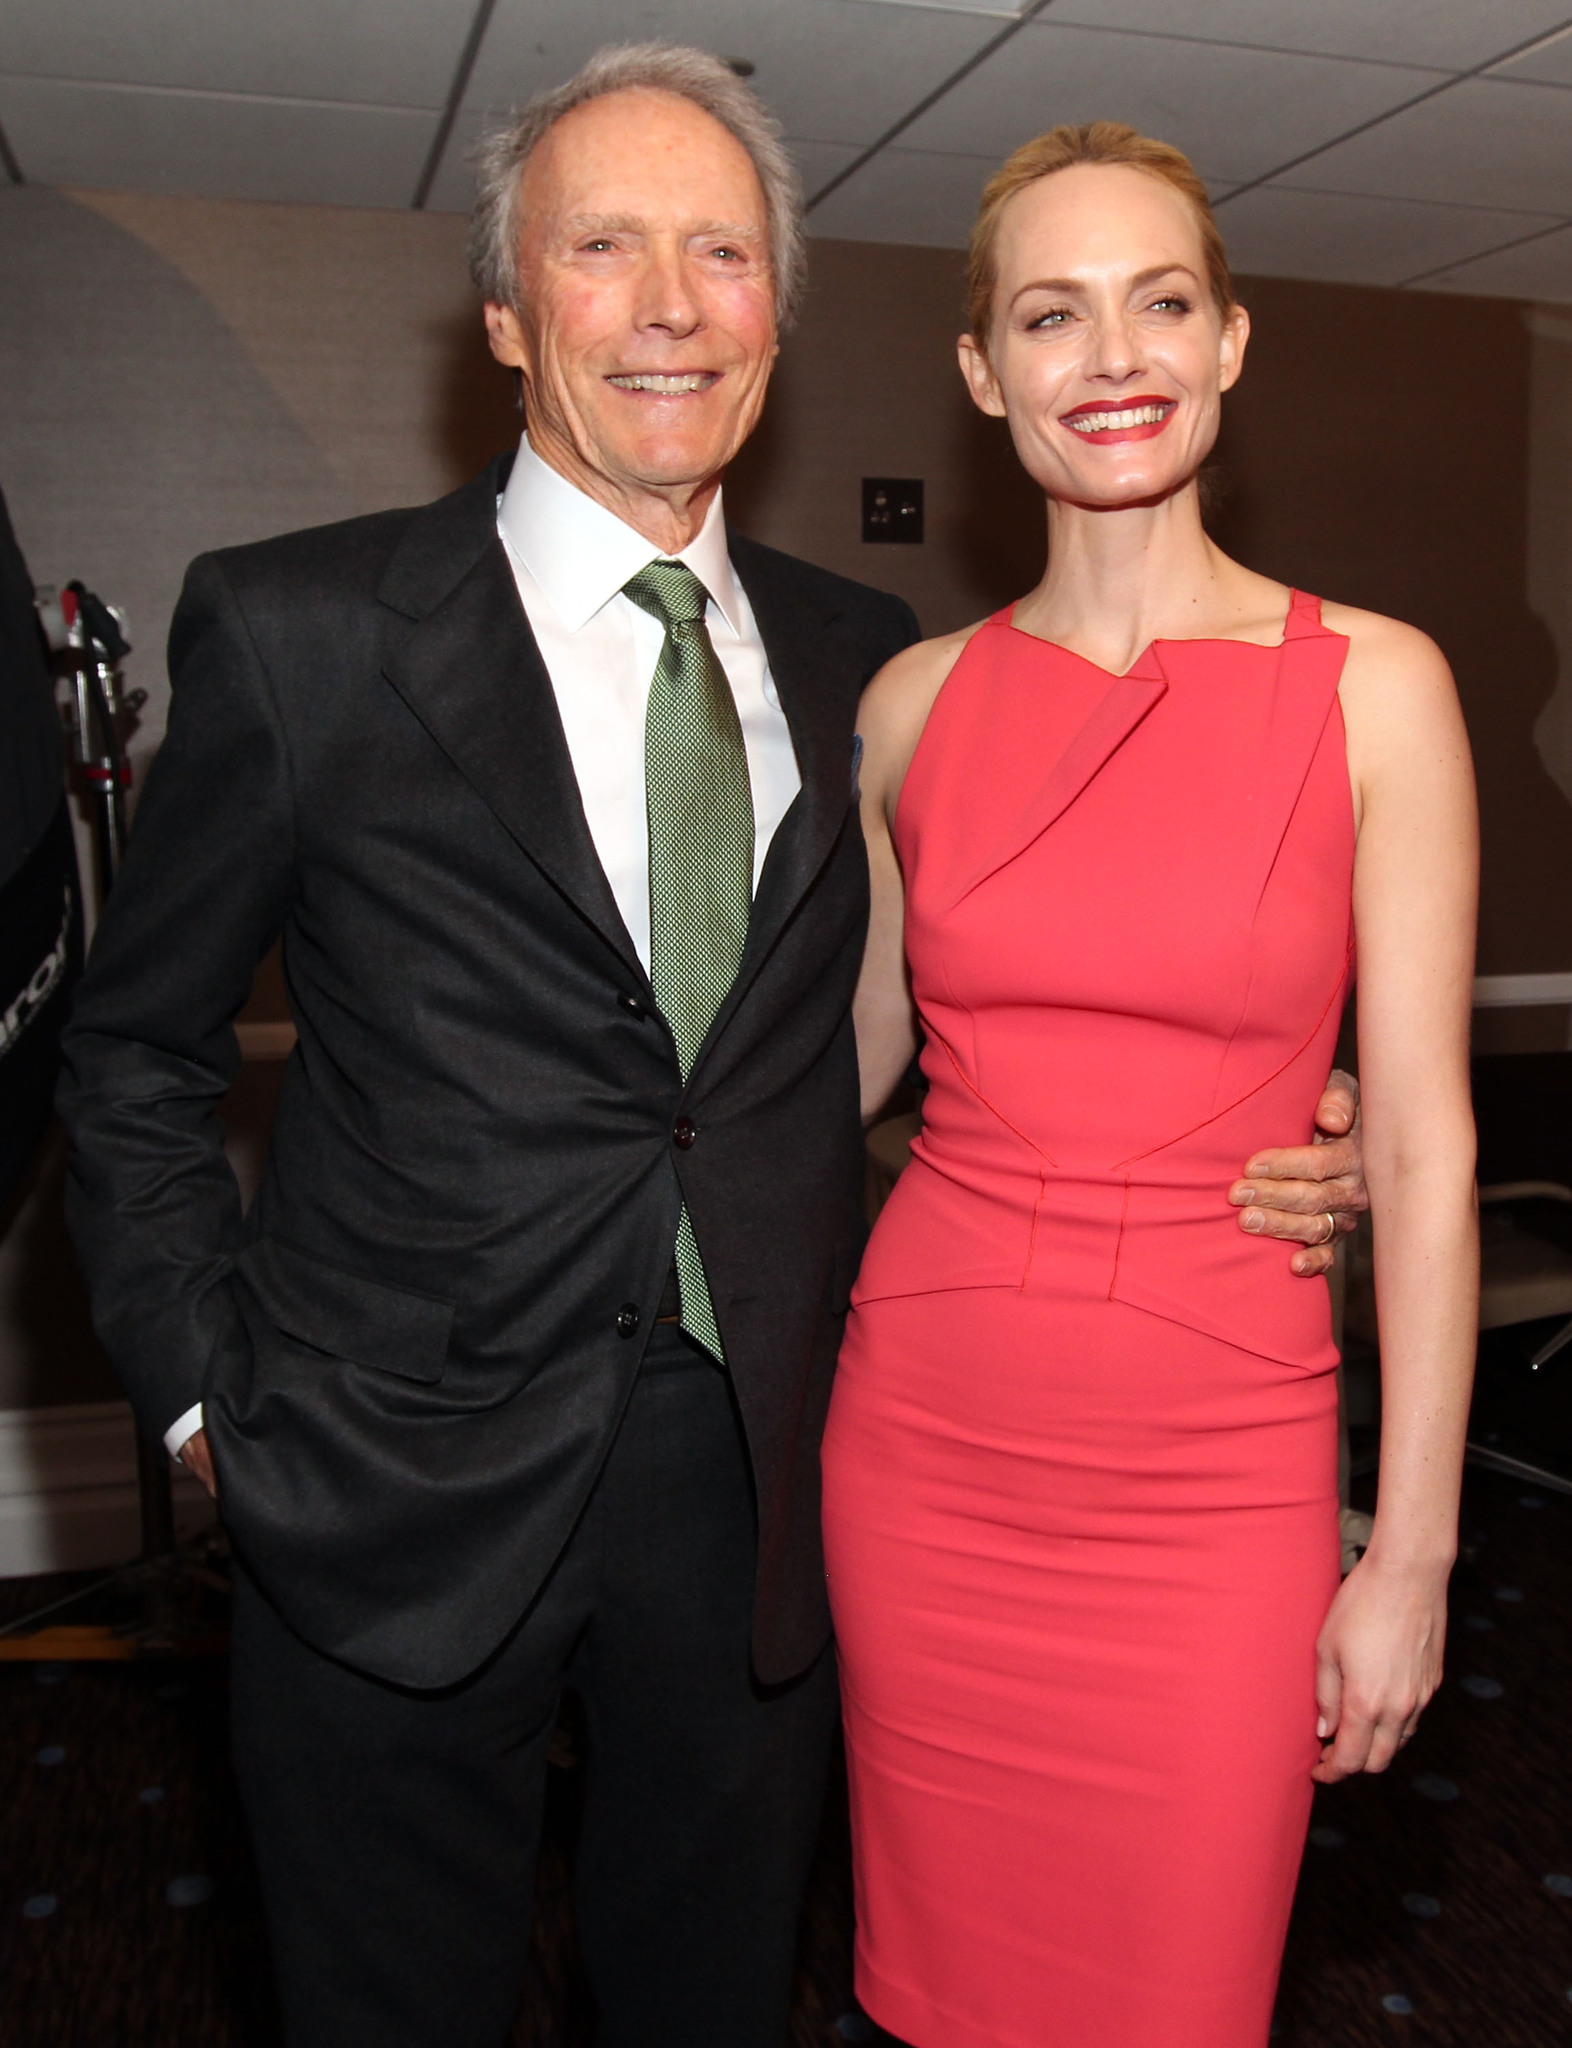 Clint Eastwood and Amber Valletta